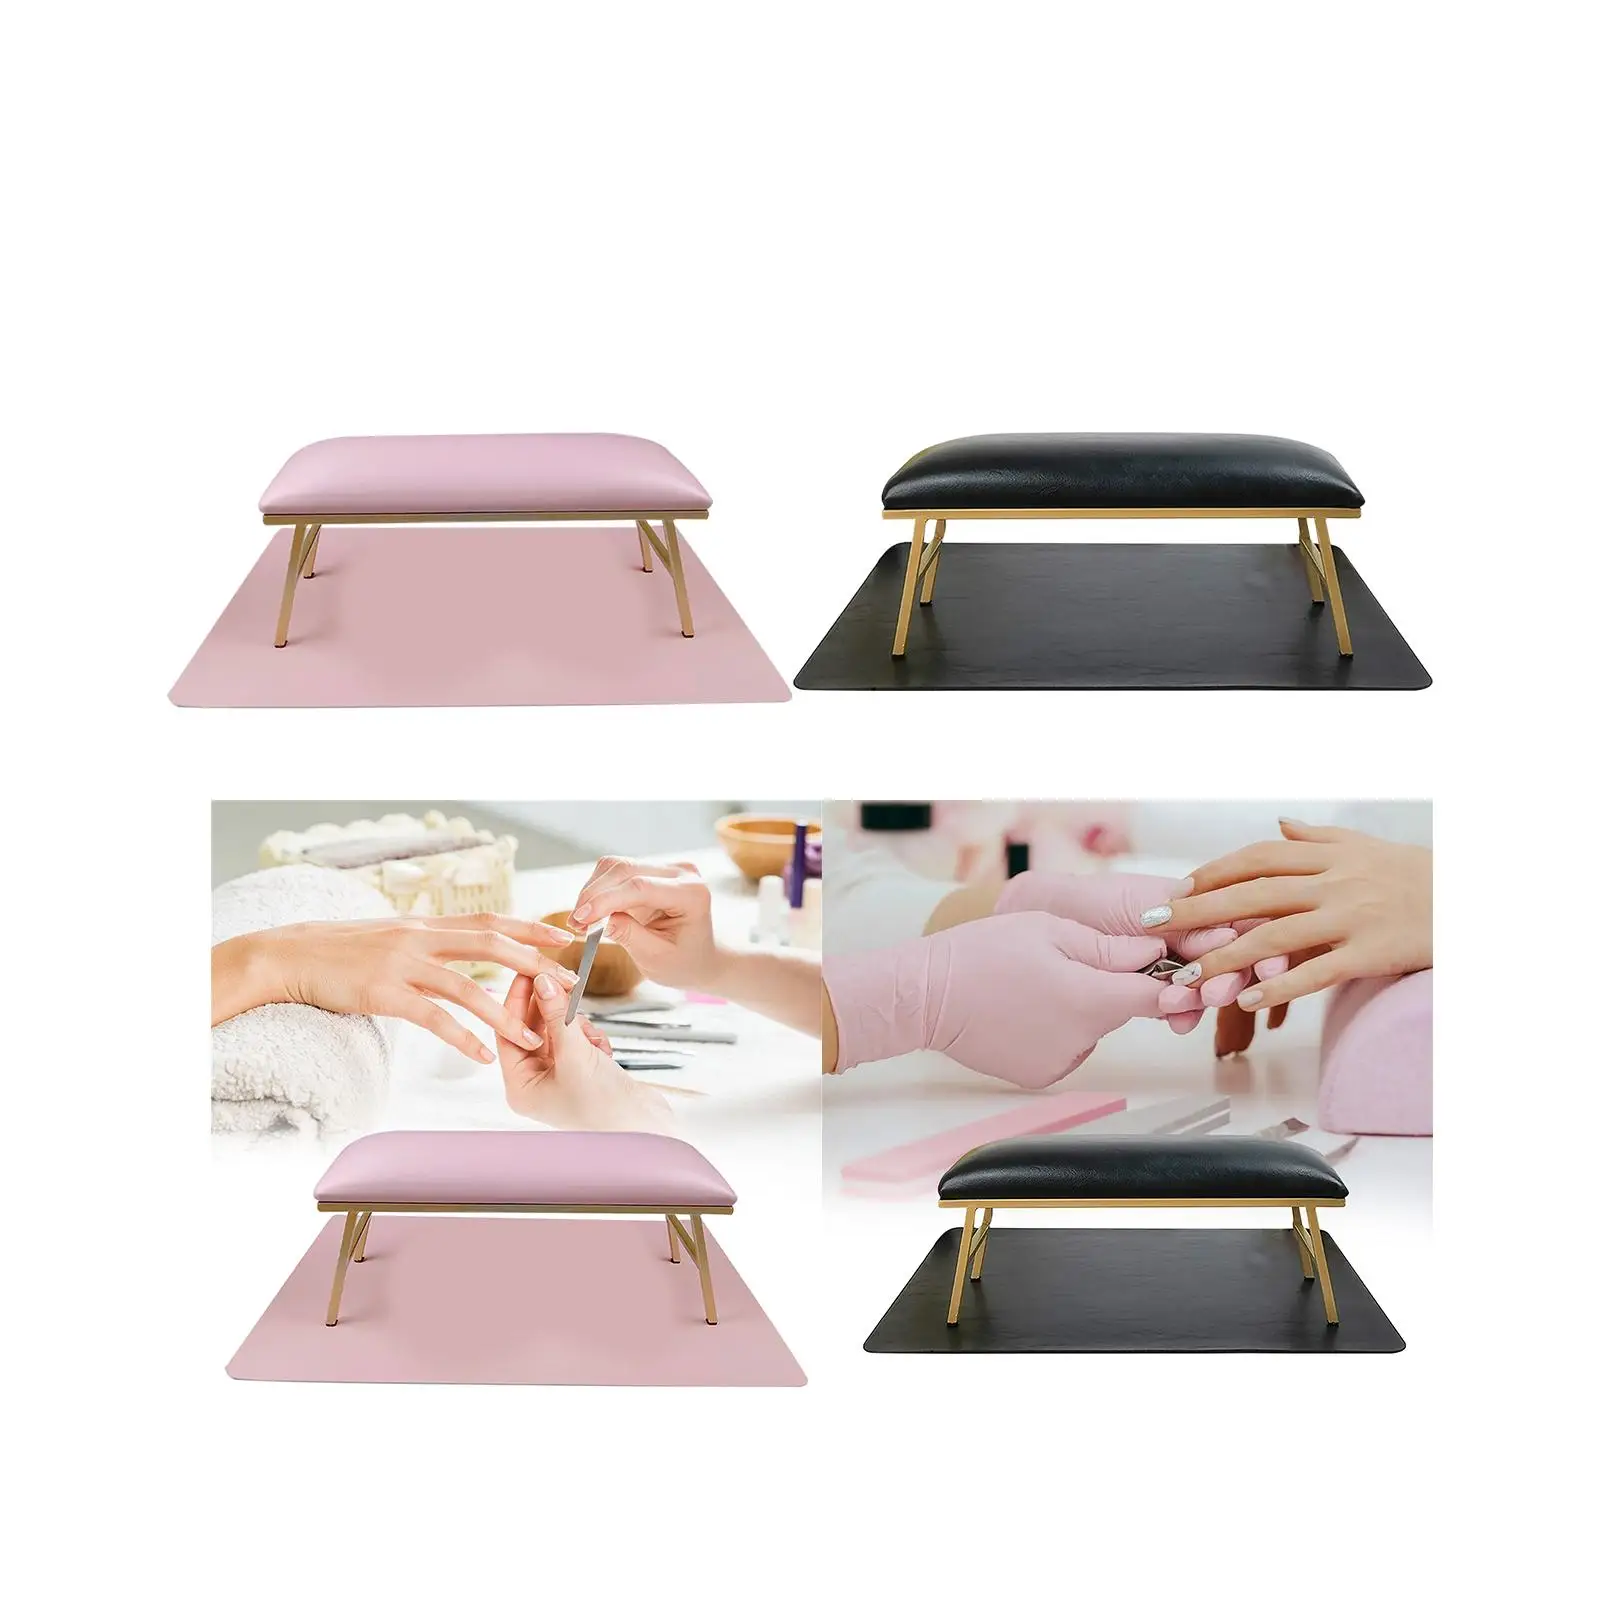 Nail Hand Pillow and Mat Set Accessory Manicure Tool Nail Arm Rest Holder Wrist Arm Pad for Manicurist Salon Nail Technician Use